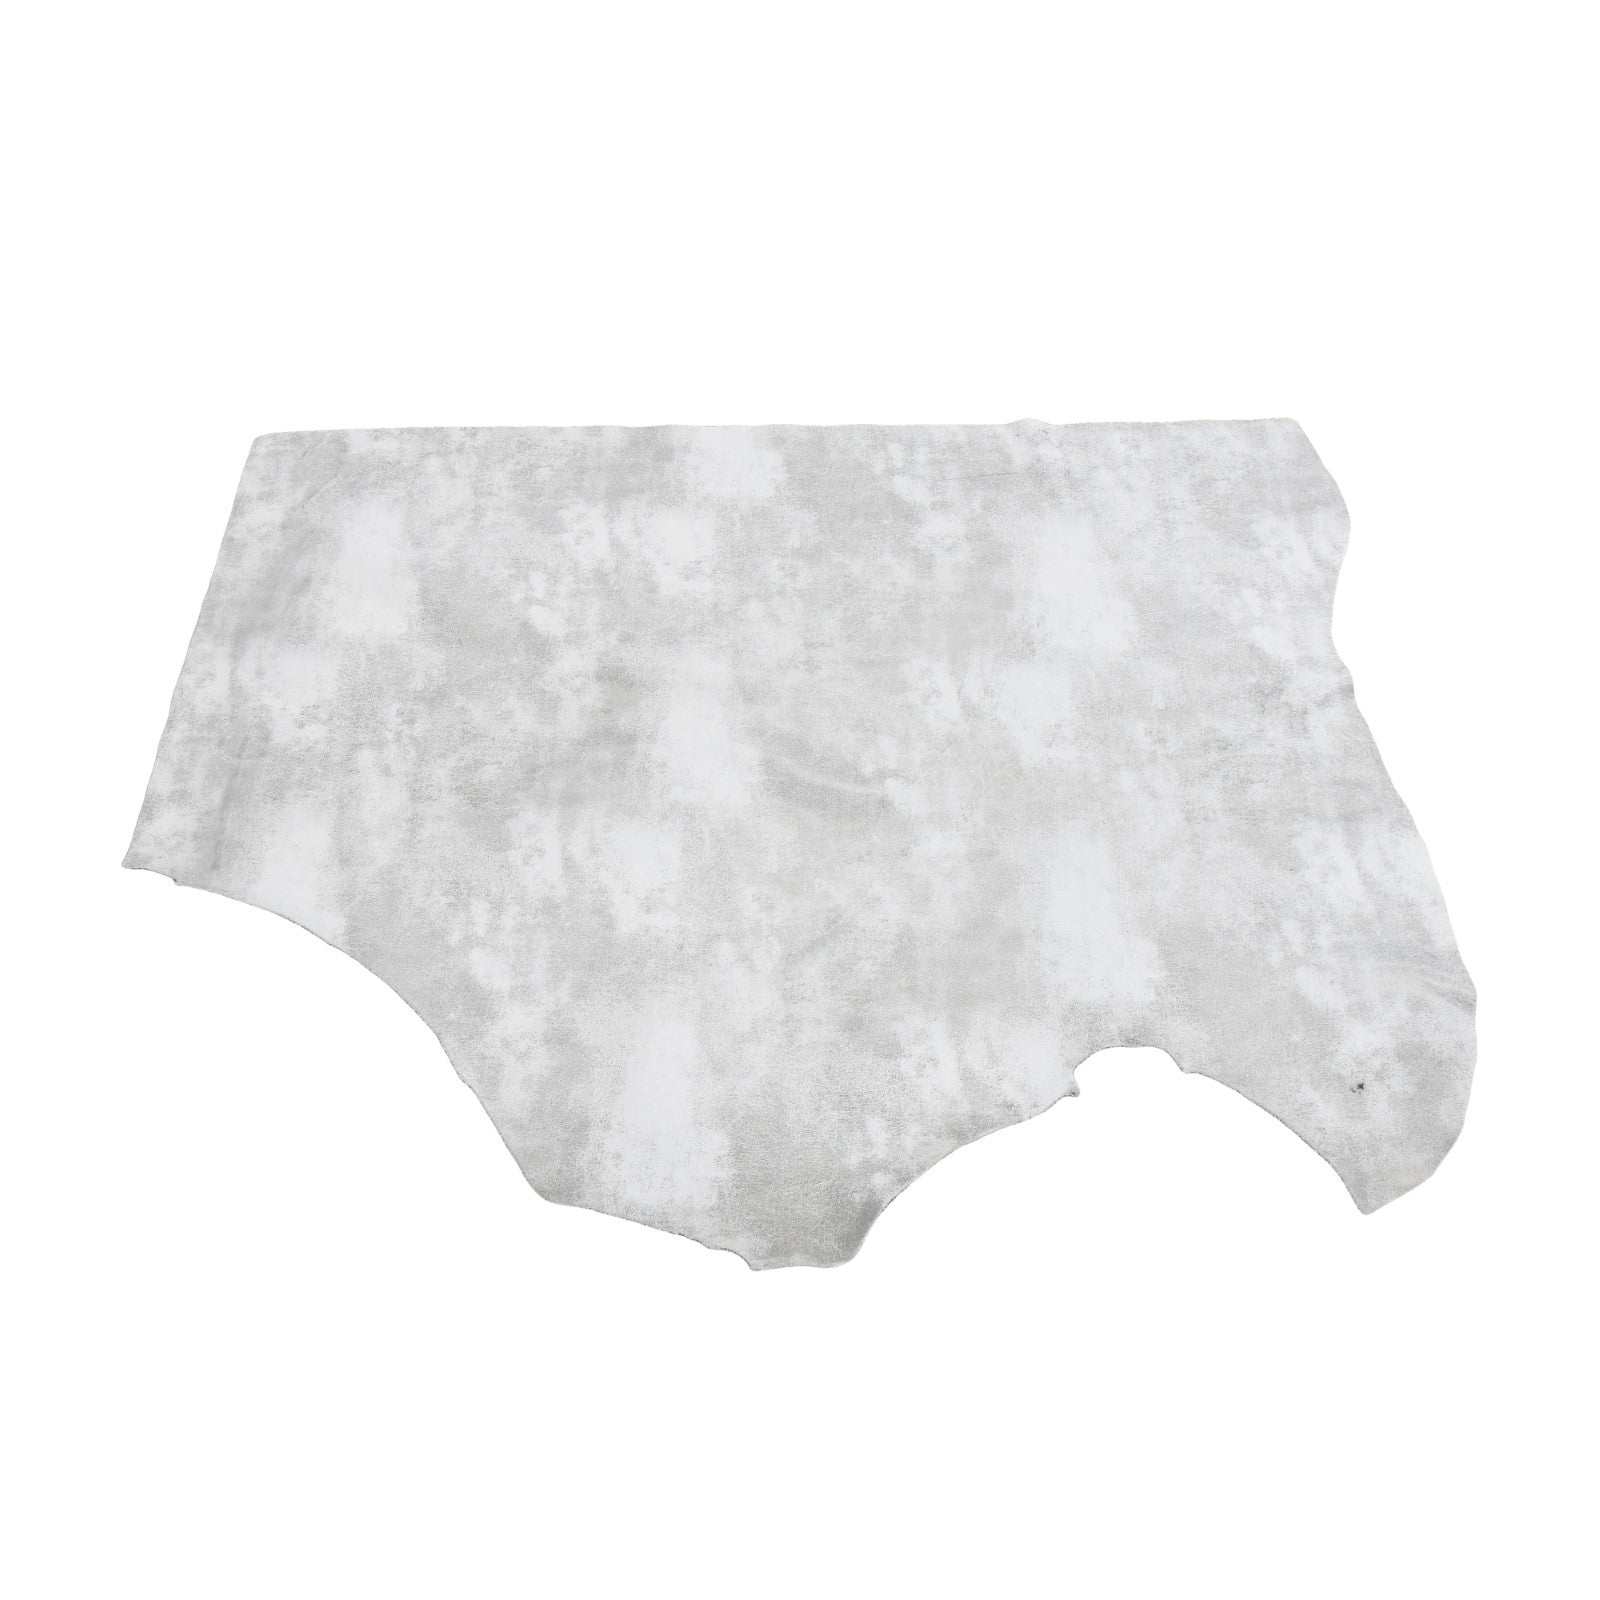 White Wedding, 2-3 oz Cow Hides, Rock N Roll, Bottom Piece / 6.5-7.5 | The Leather Guy